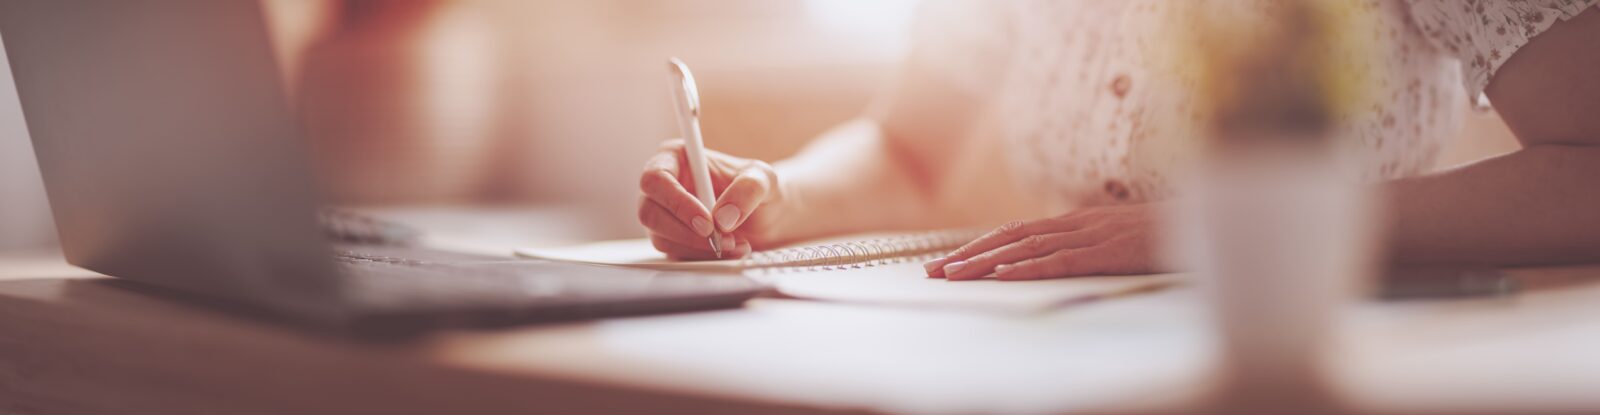 Person writing with a pen in a notebook